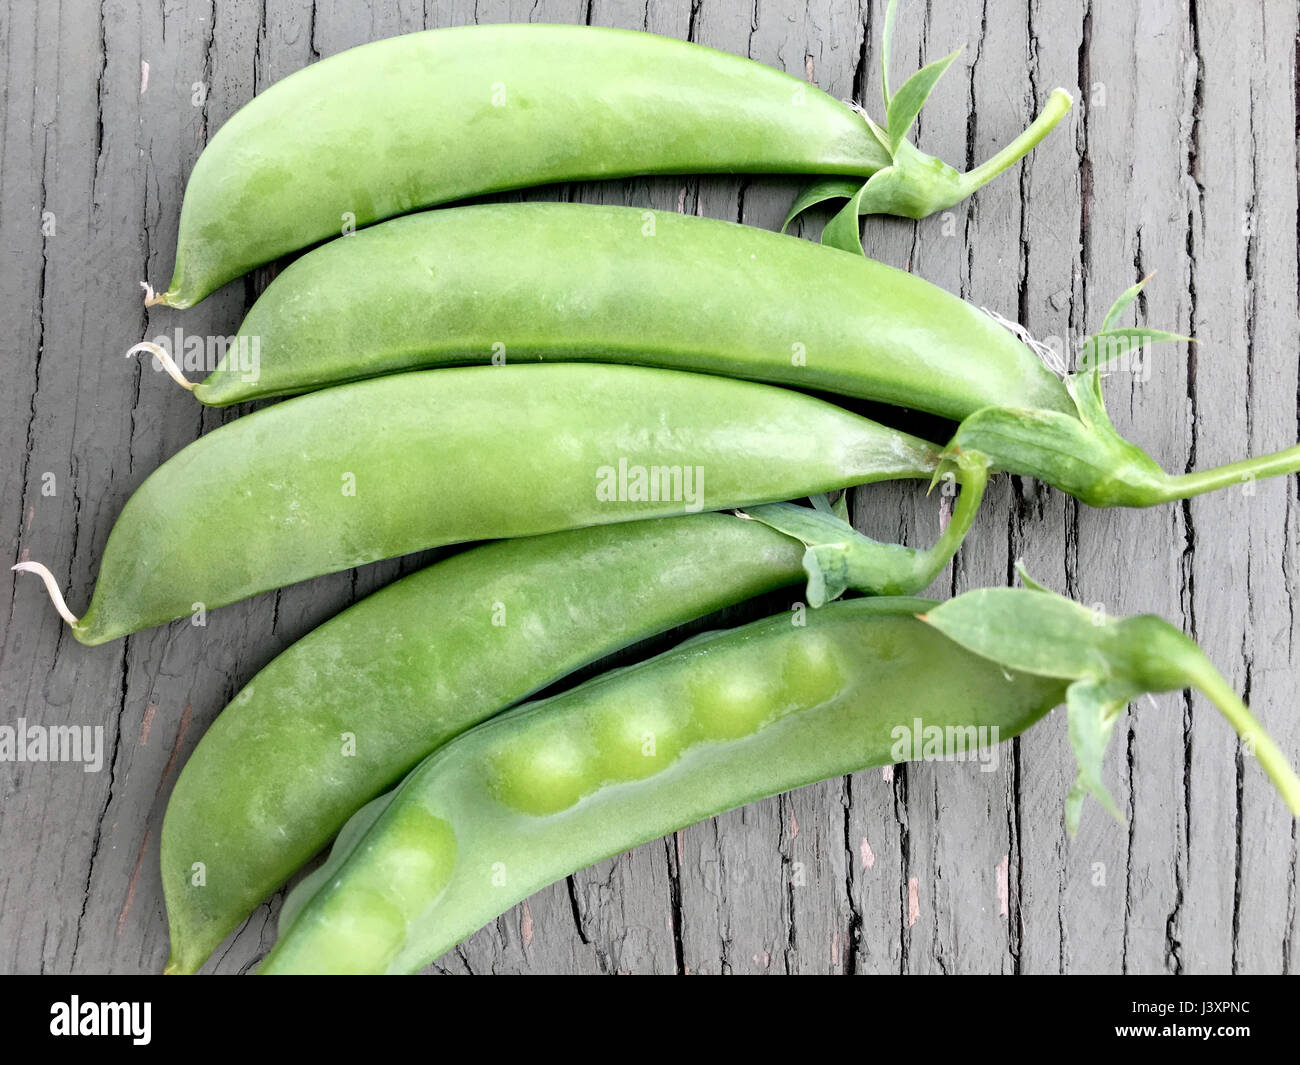 Group of fresh peas in the pod from the garden. Stock Photo